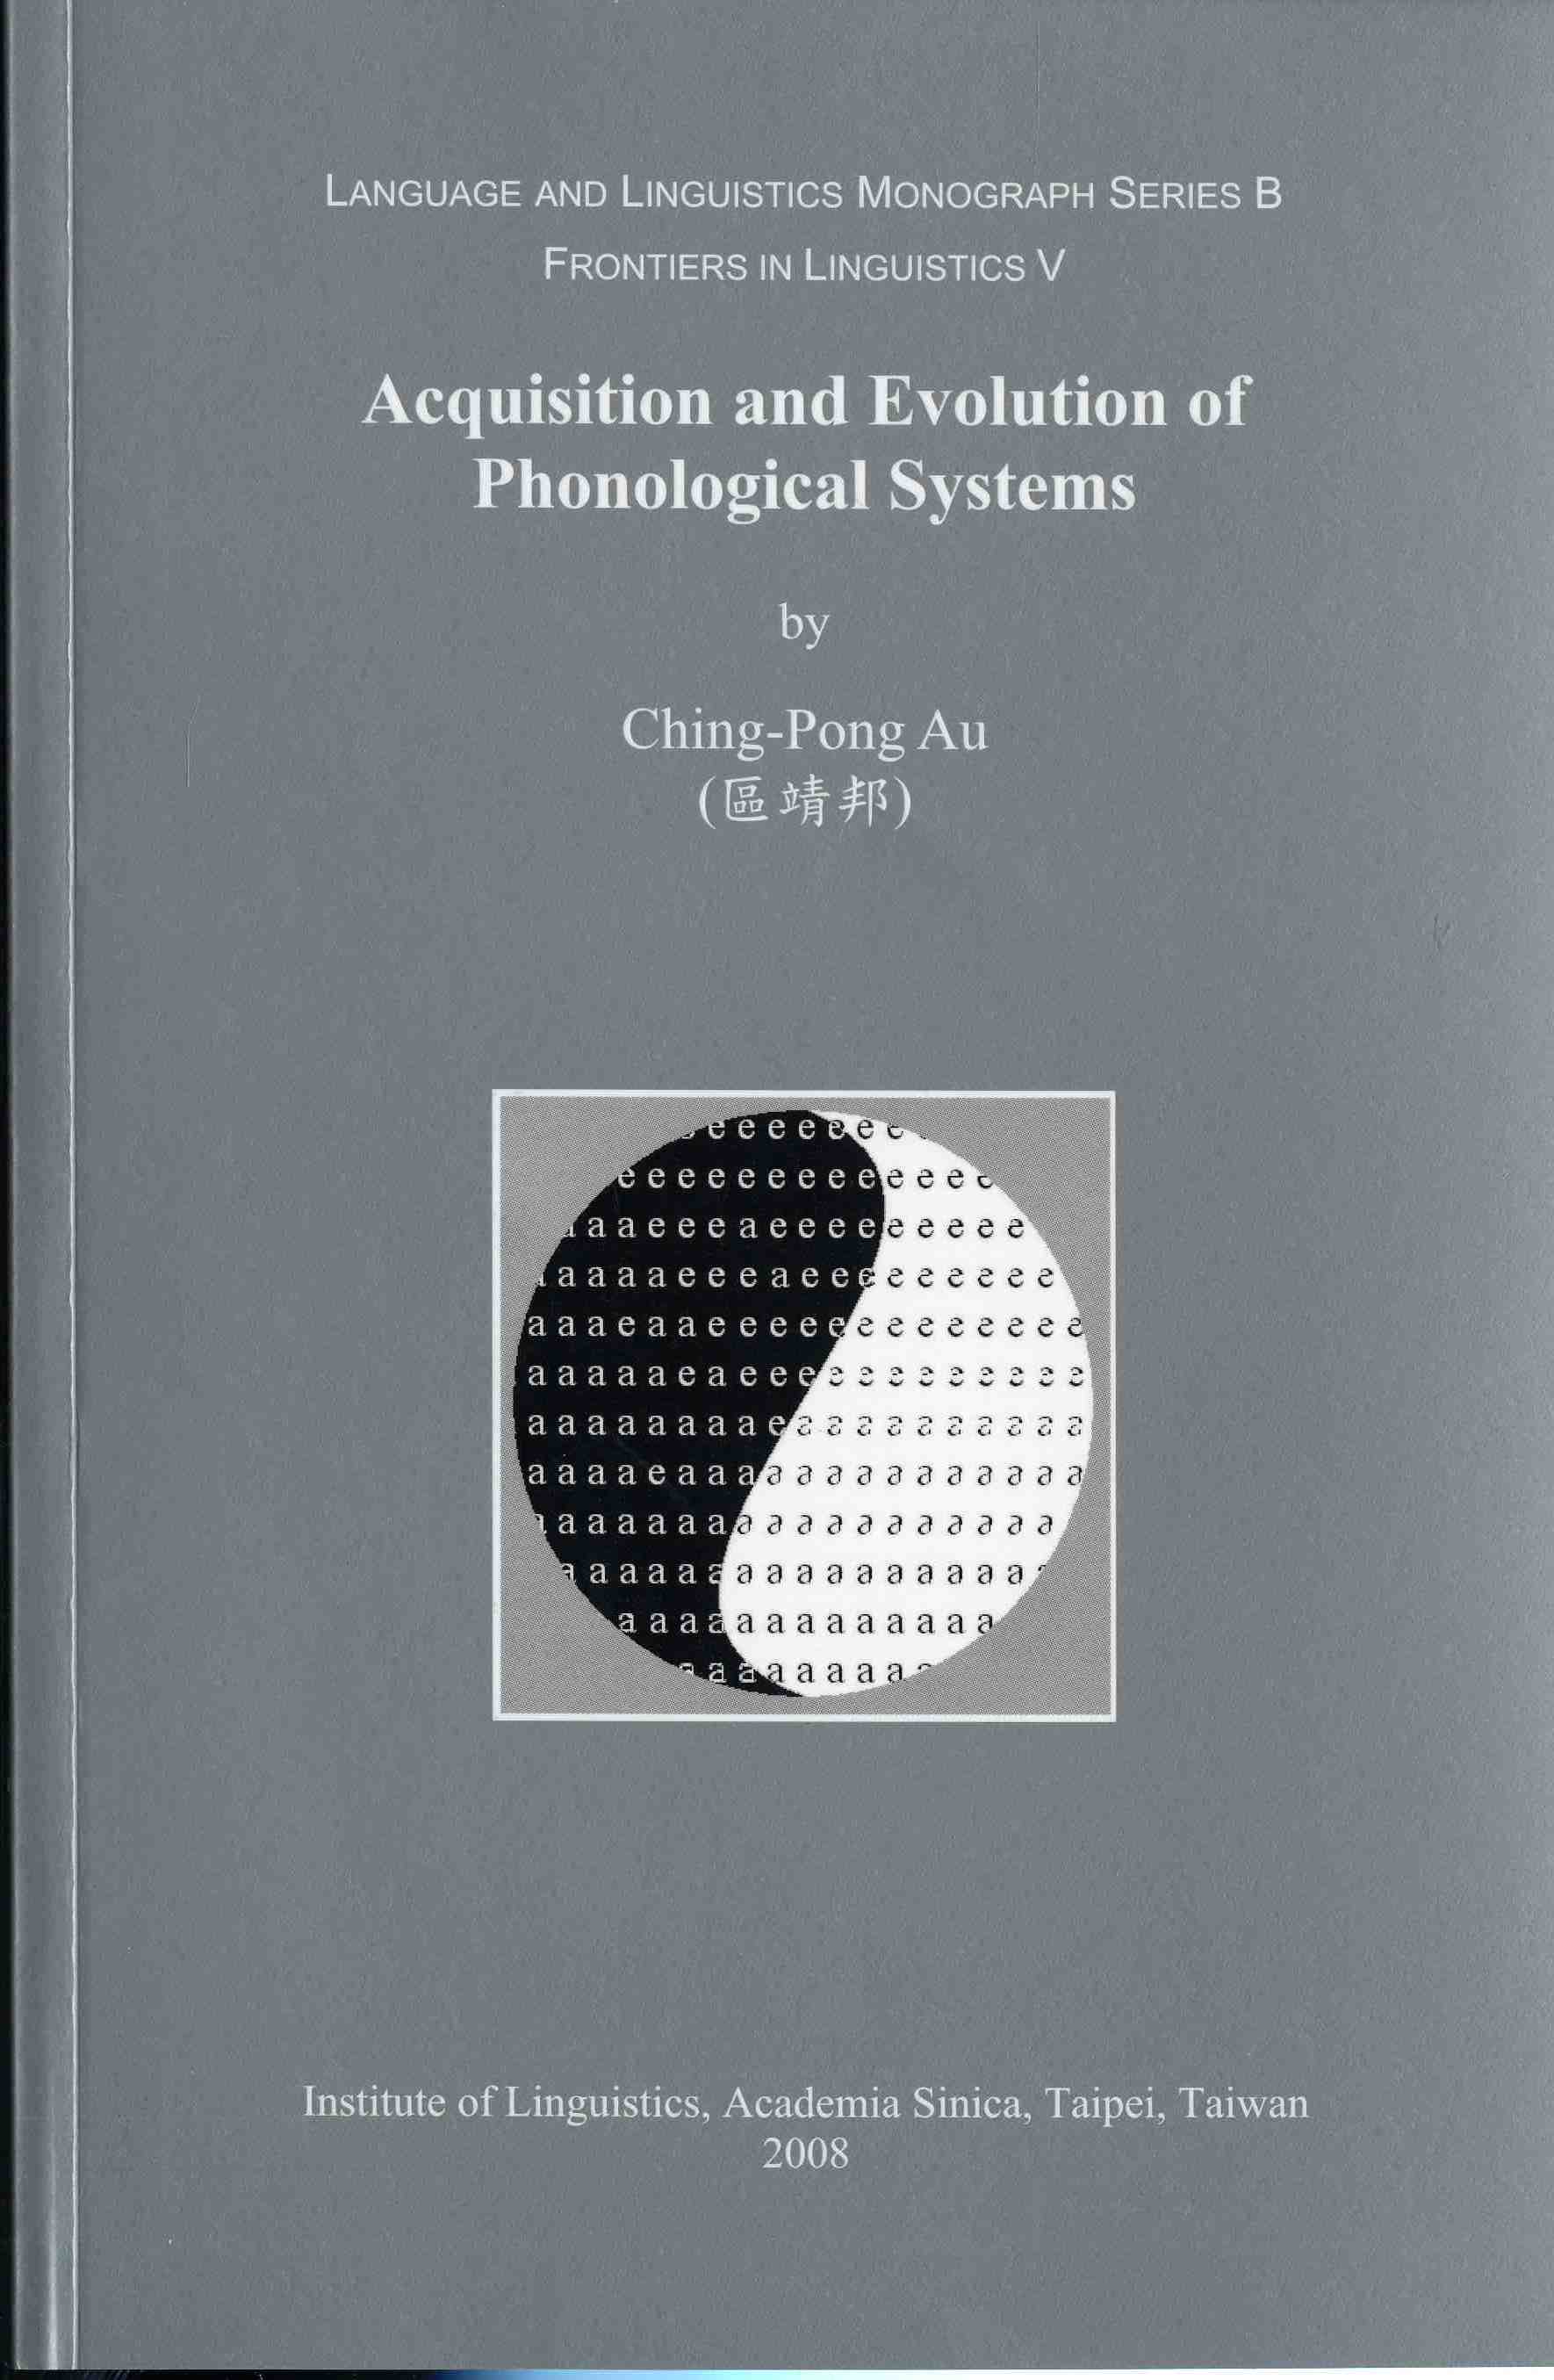 Acquisition and Evolution of Phonological Systems